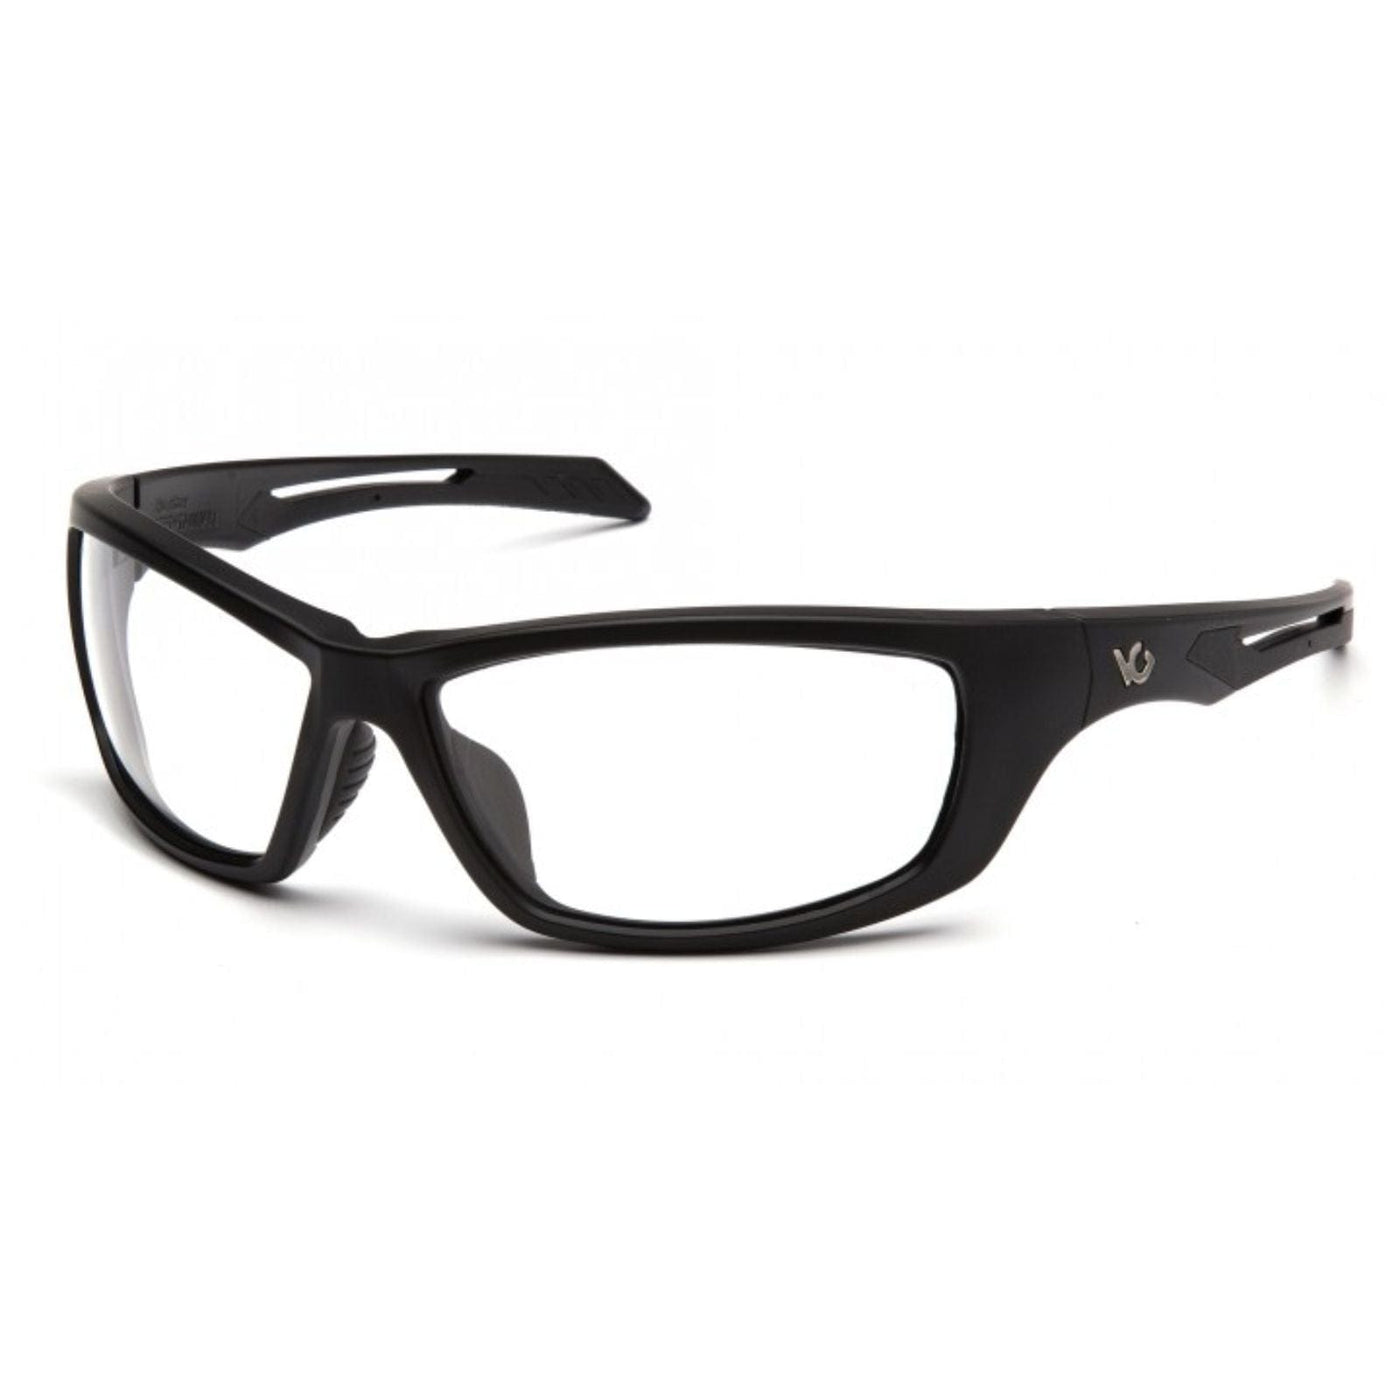 PYRAMEX SAFETY PRODUCTS Pyramex Howitzer Safety Glasses Blk Frame Clear AntiFog Lens Apparel